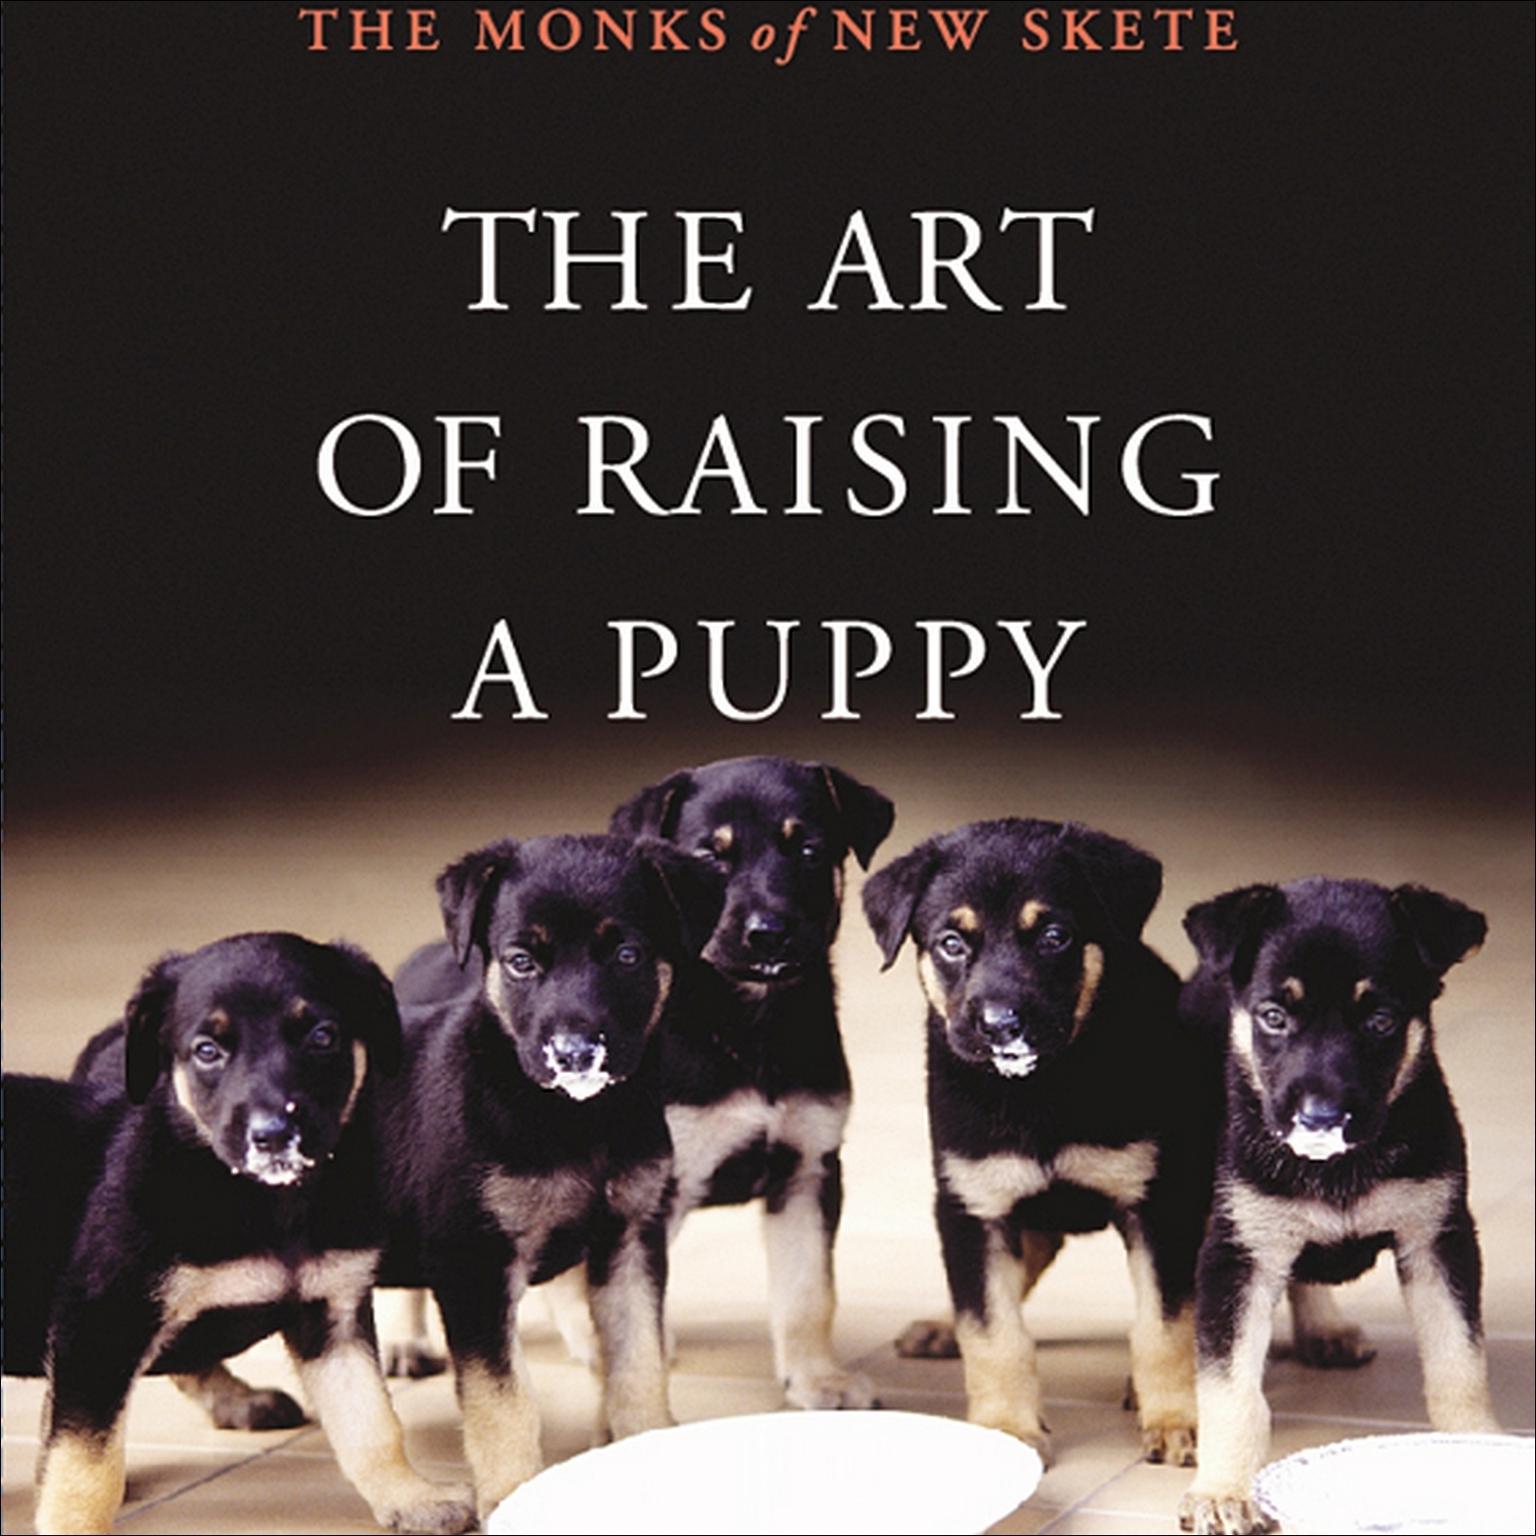 The Art of Raising a Puppy (Abridged) Audiobook, by The Monks of New Skete